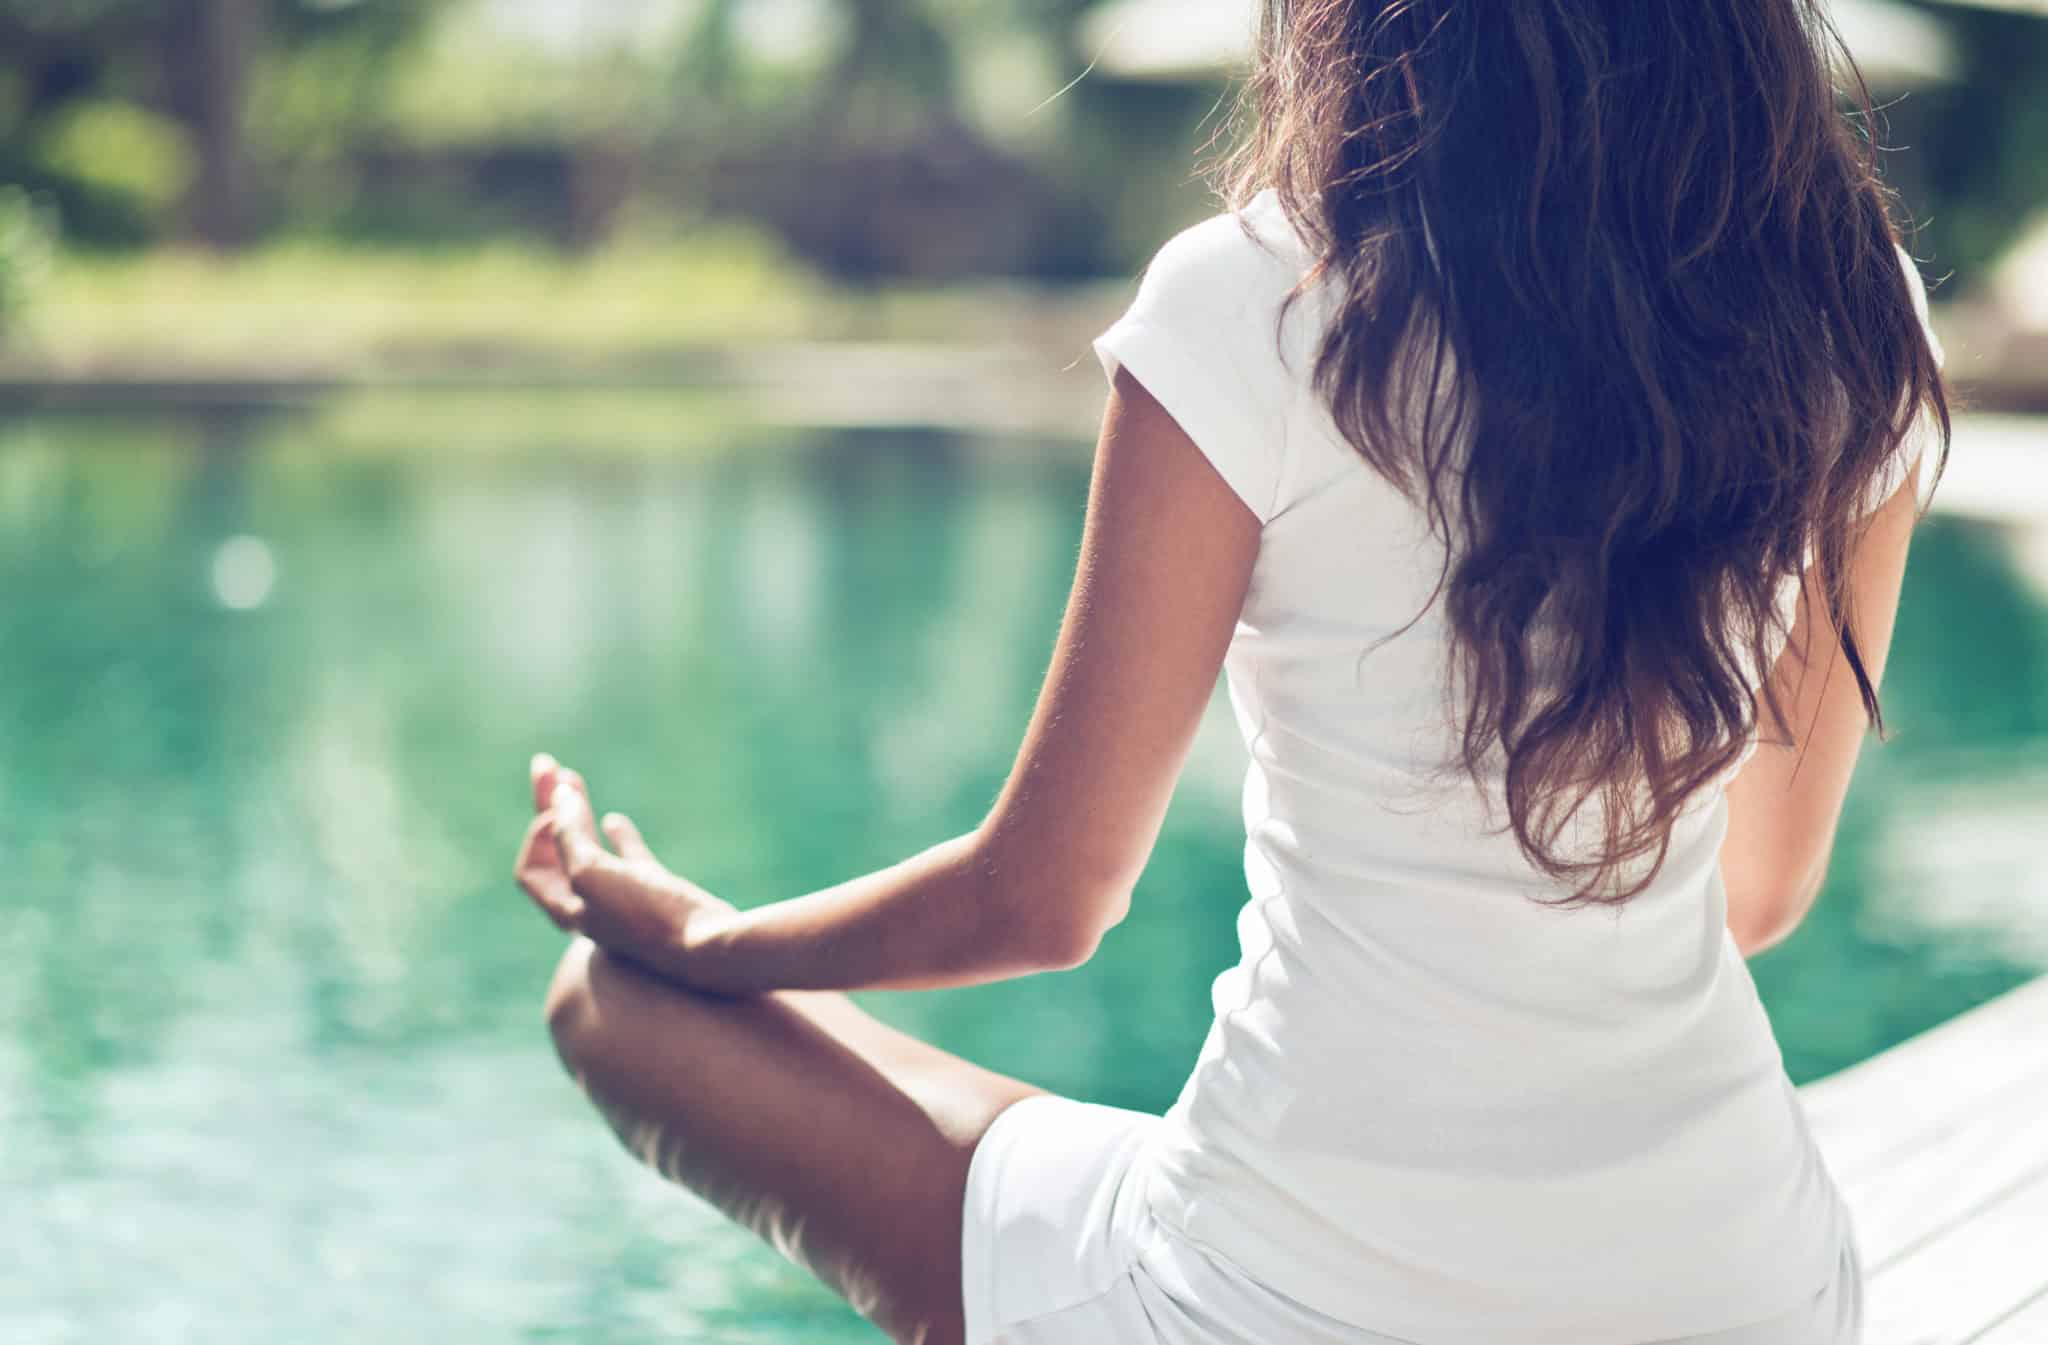 There are so many benefits of meditation, from improved mood to a boosted immune system!